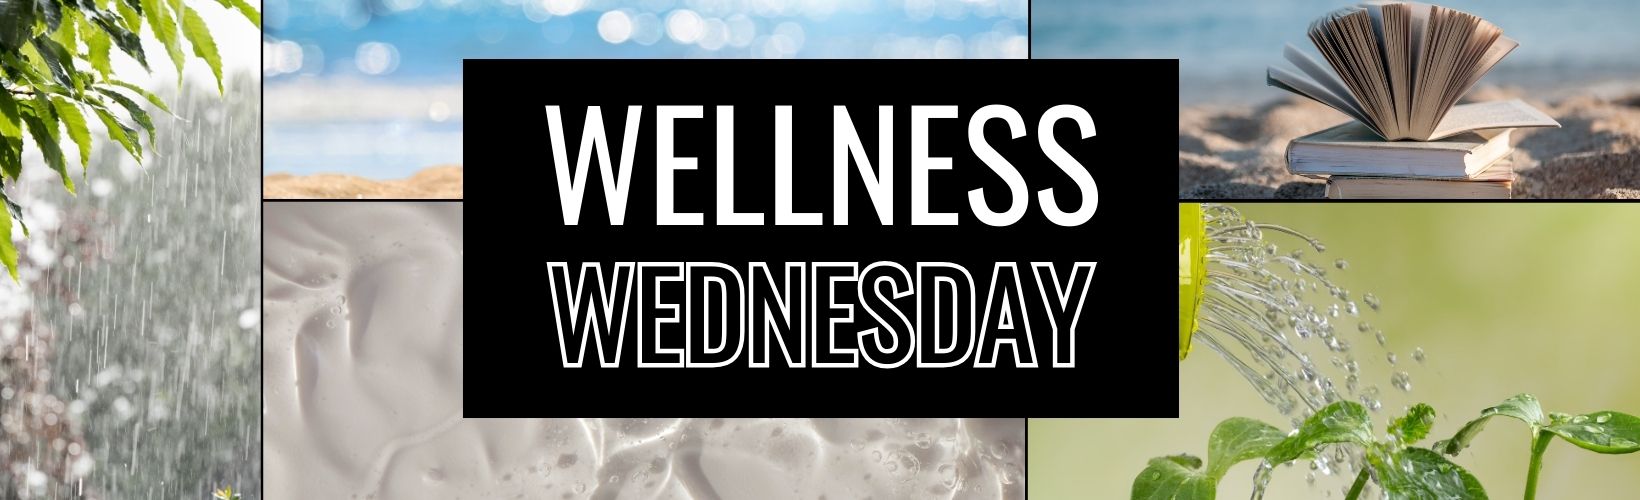 Wellness Wednesday: Natural and Holistic Ways to Reduce Anxiety